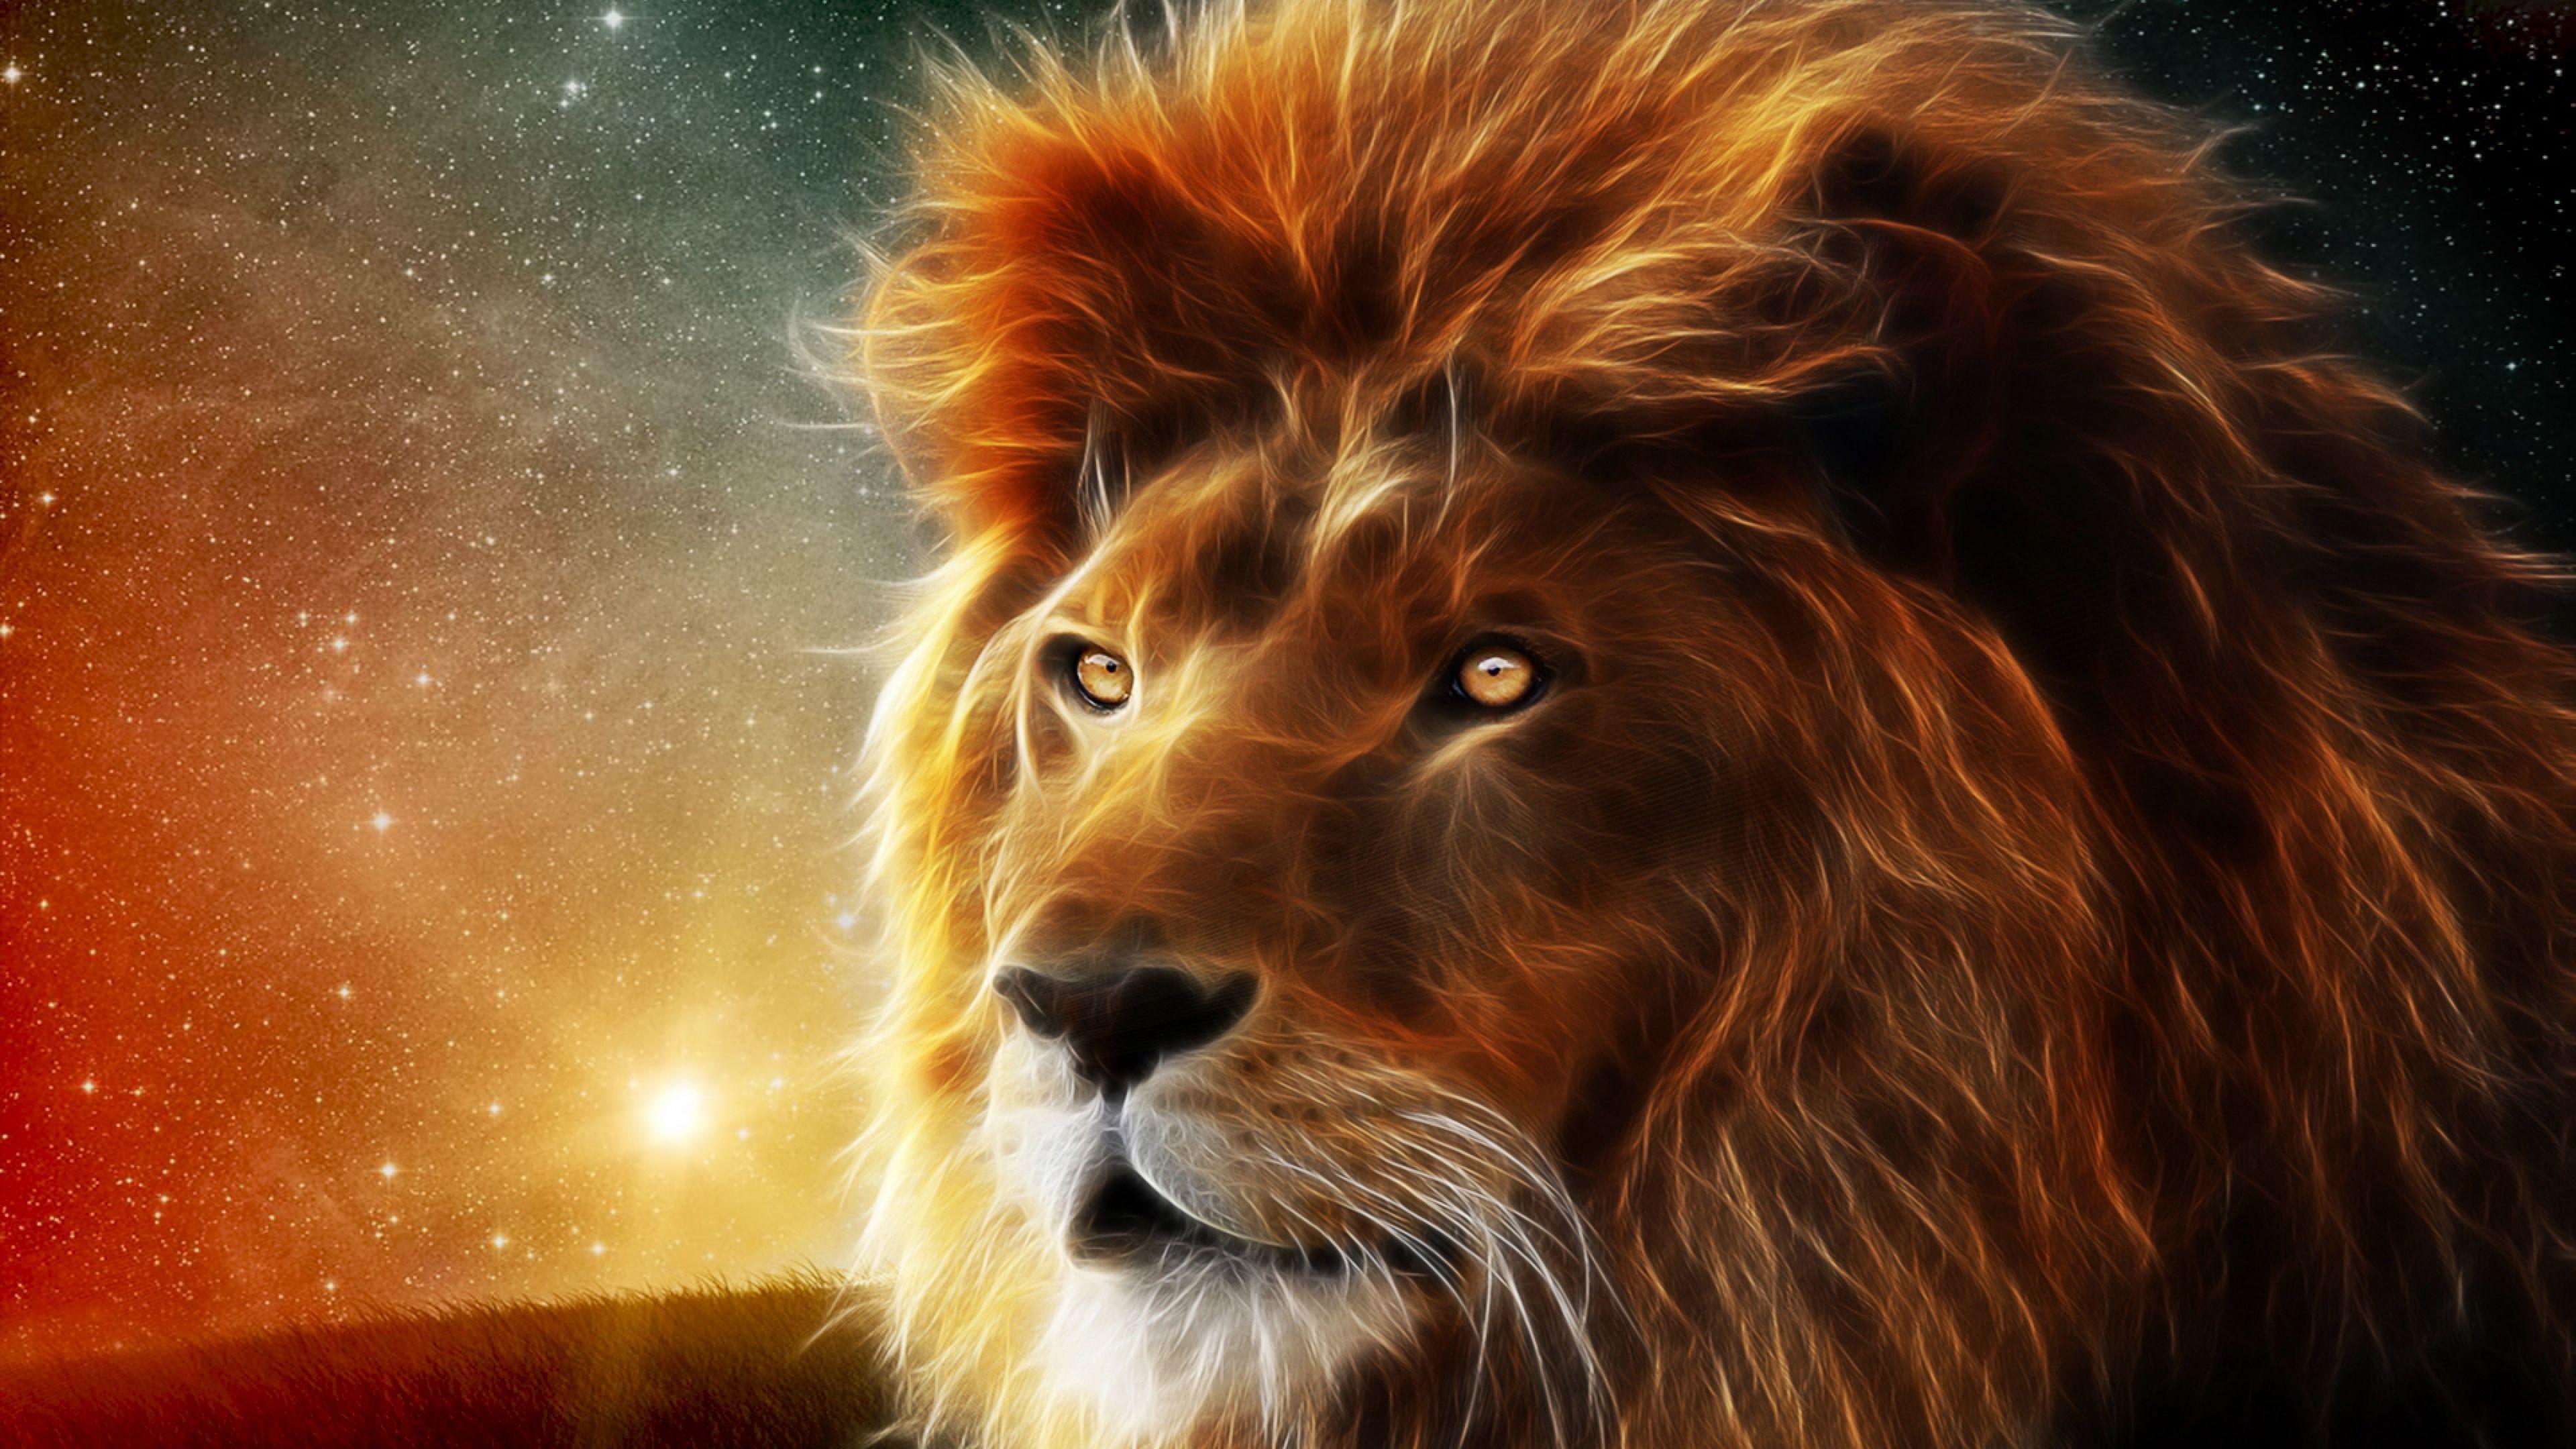 Free Lion Face Image, Download Free Clip Art, Free Clip Art on Clipart Library